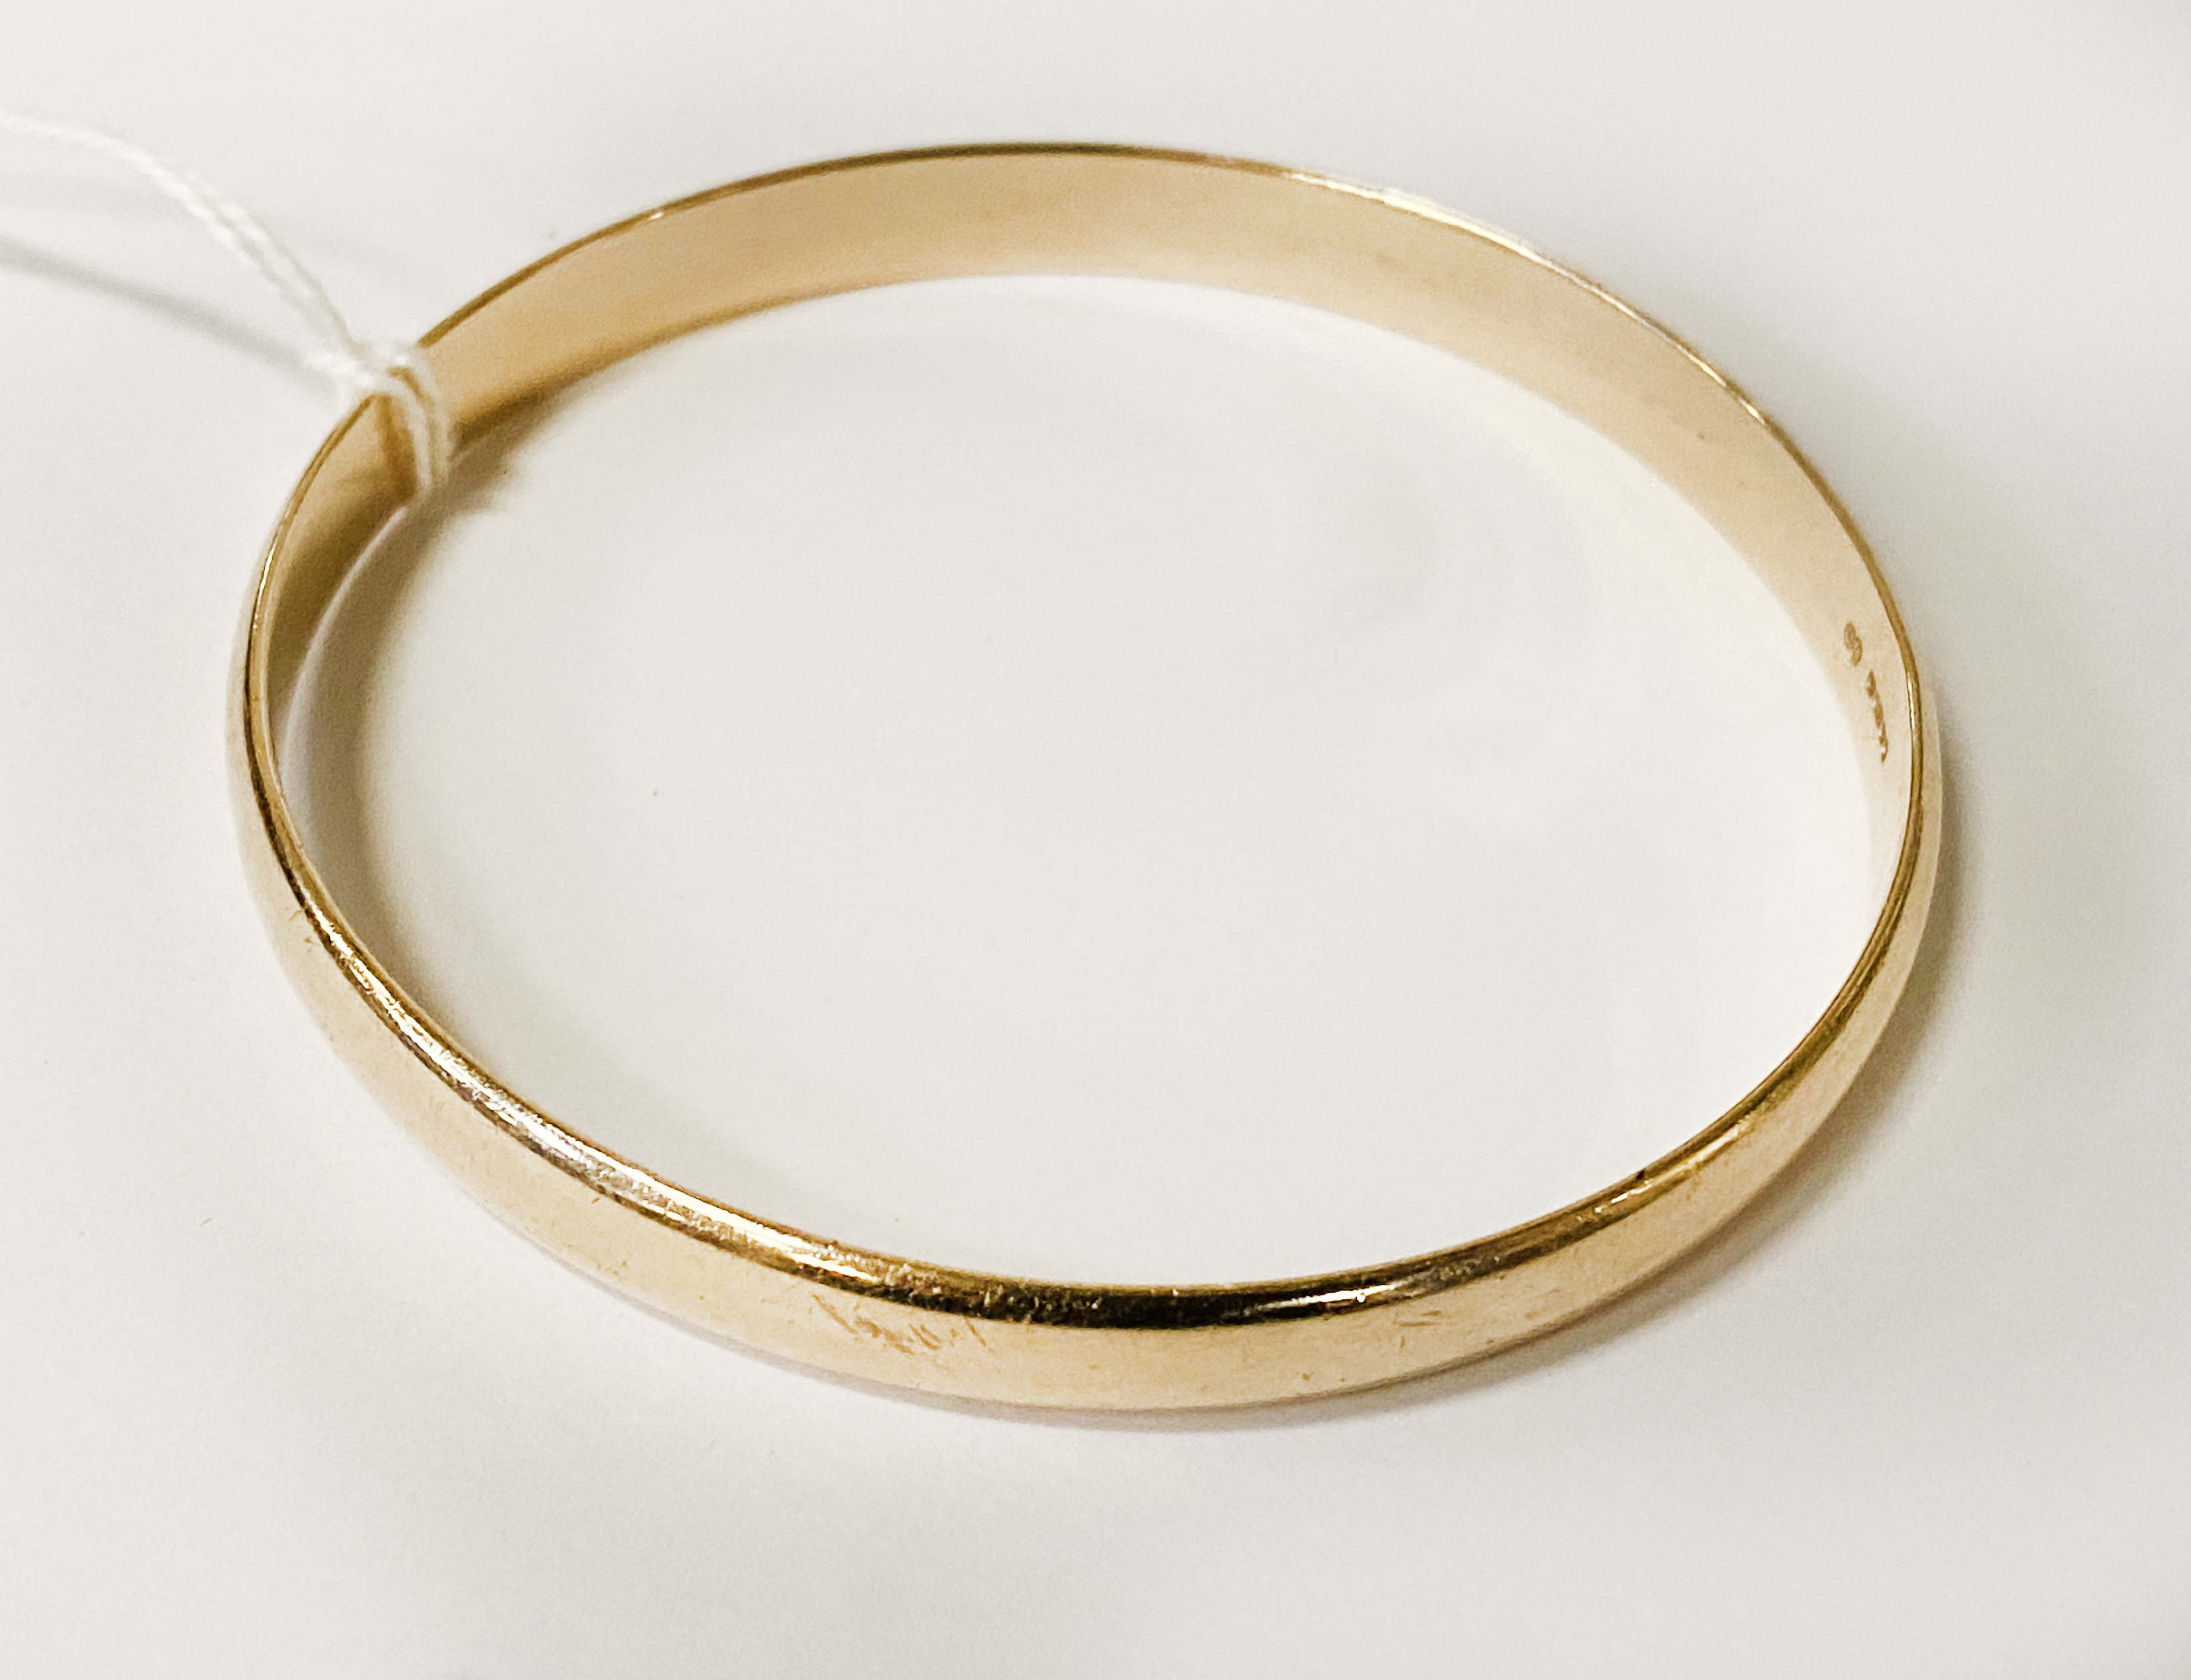 9CT GOLD BANGLE - 32 GRAMS APPROX